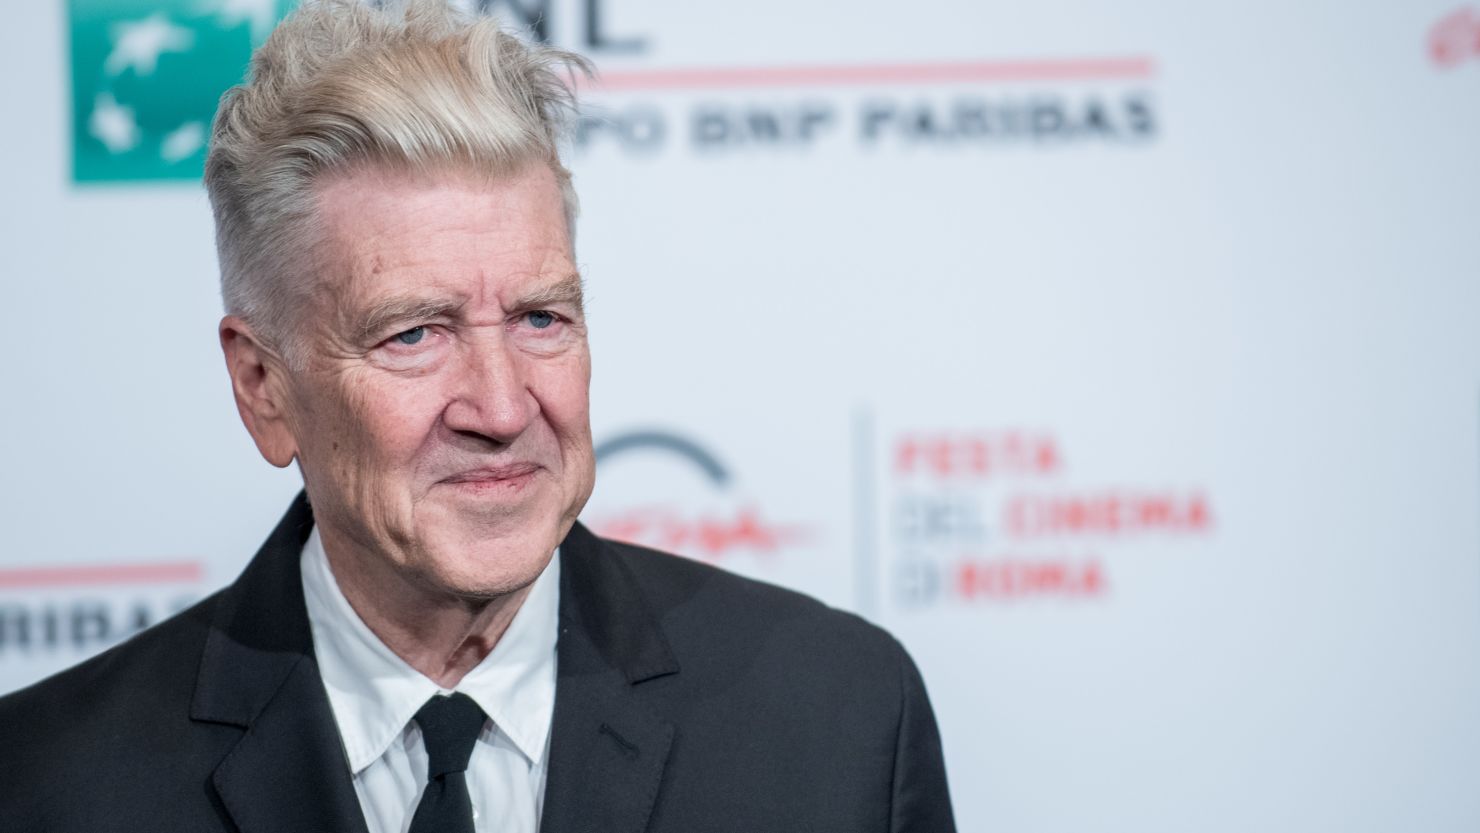 David Lynch says quote on Trump was ‘taken a bit out of context’ | CNN